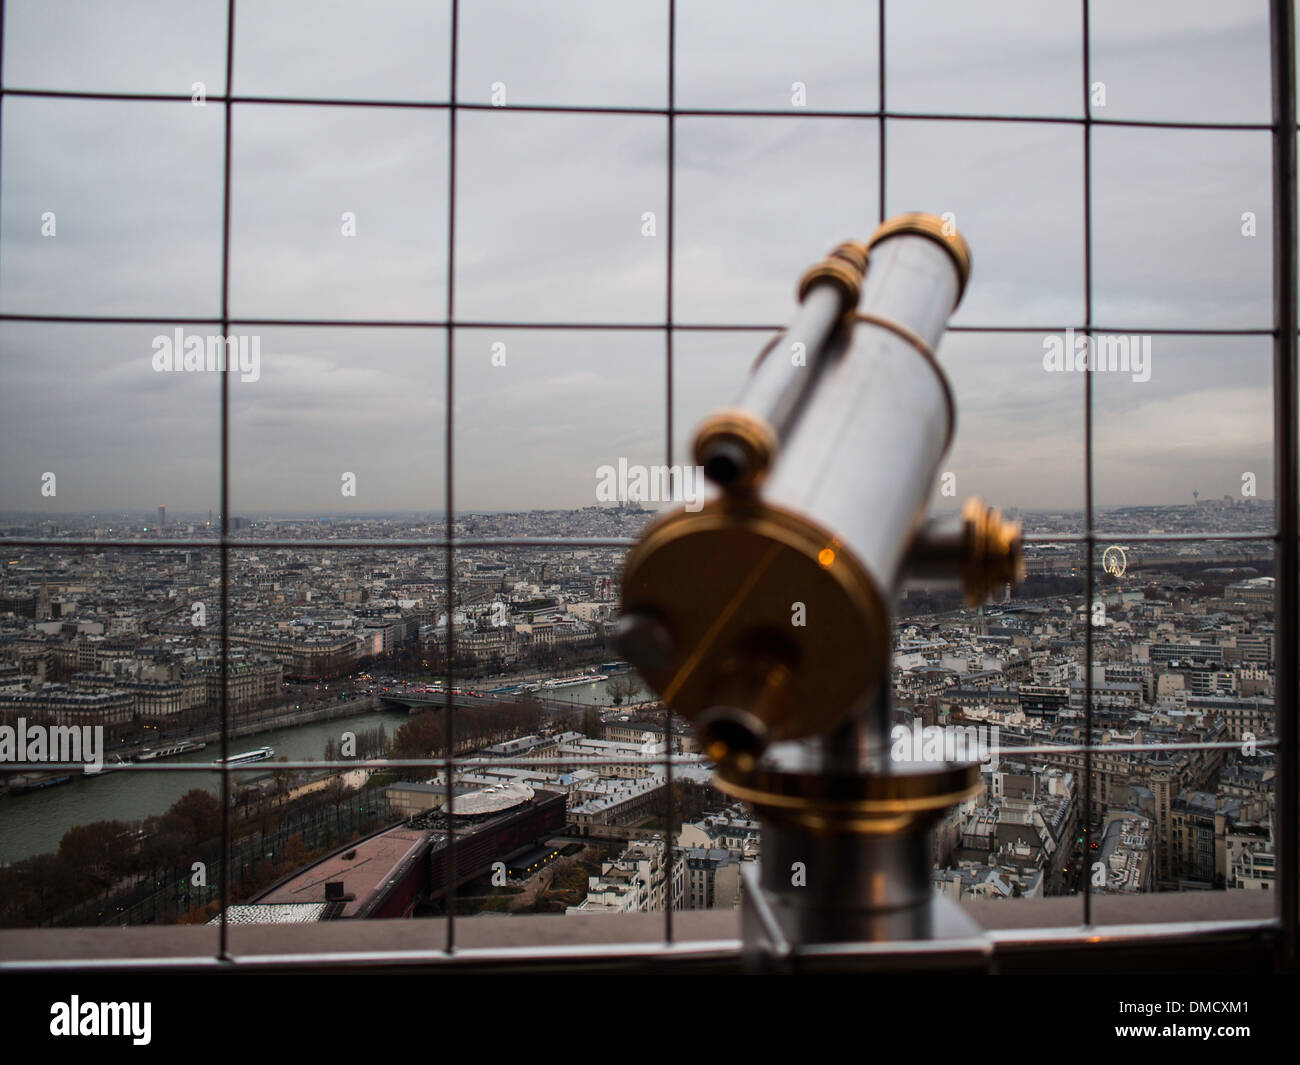 Paris city view from the top of the Eiffel tower with binocular Stock Photo